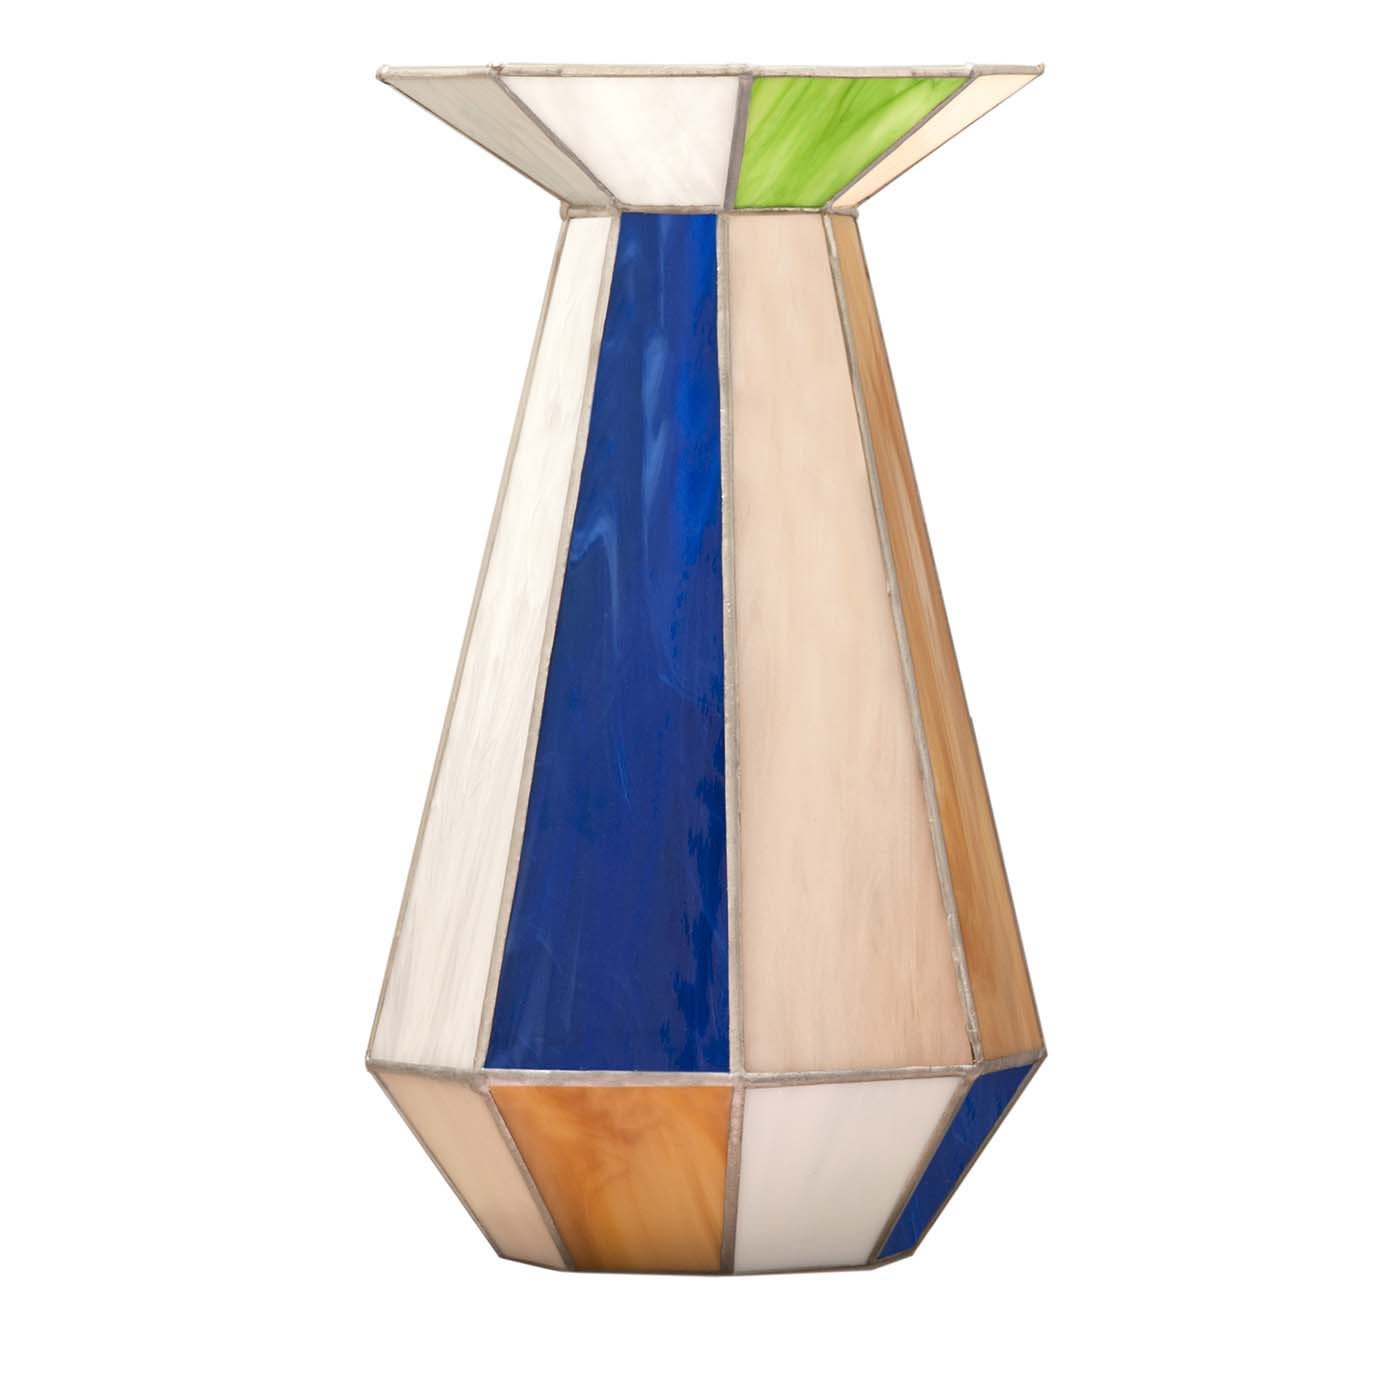 Caleido Large Stained Glass Vase - Serena Confalonieri